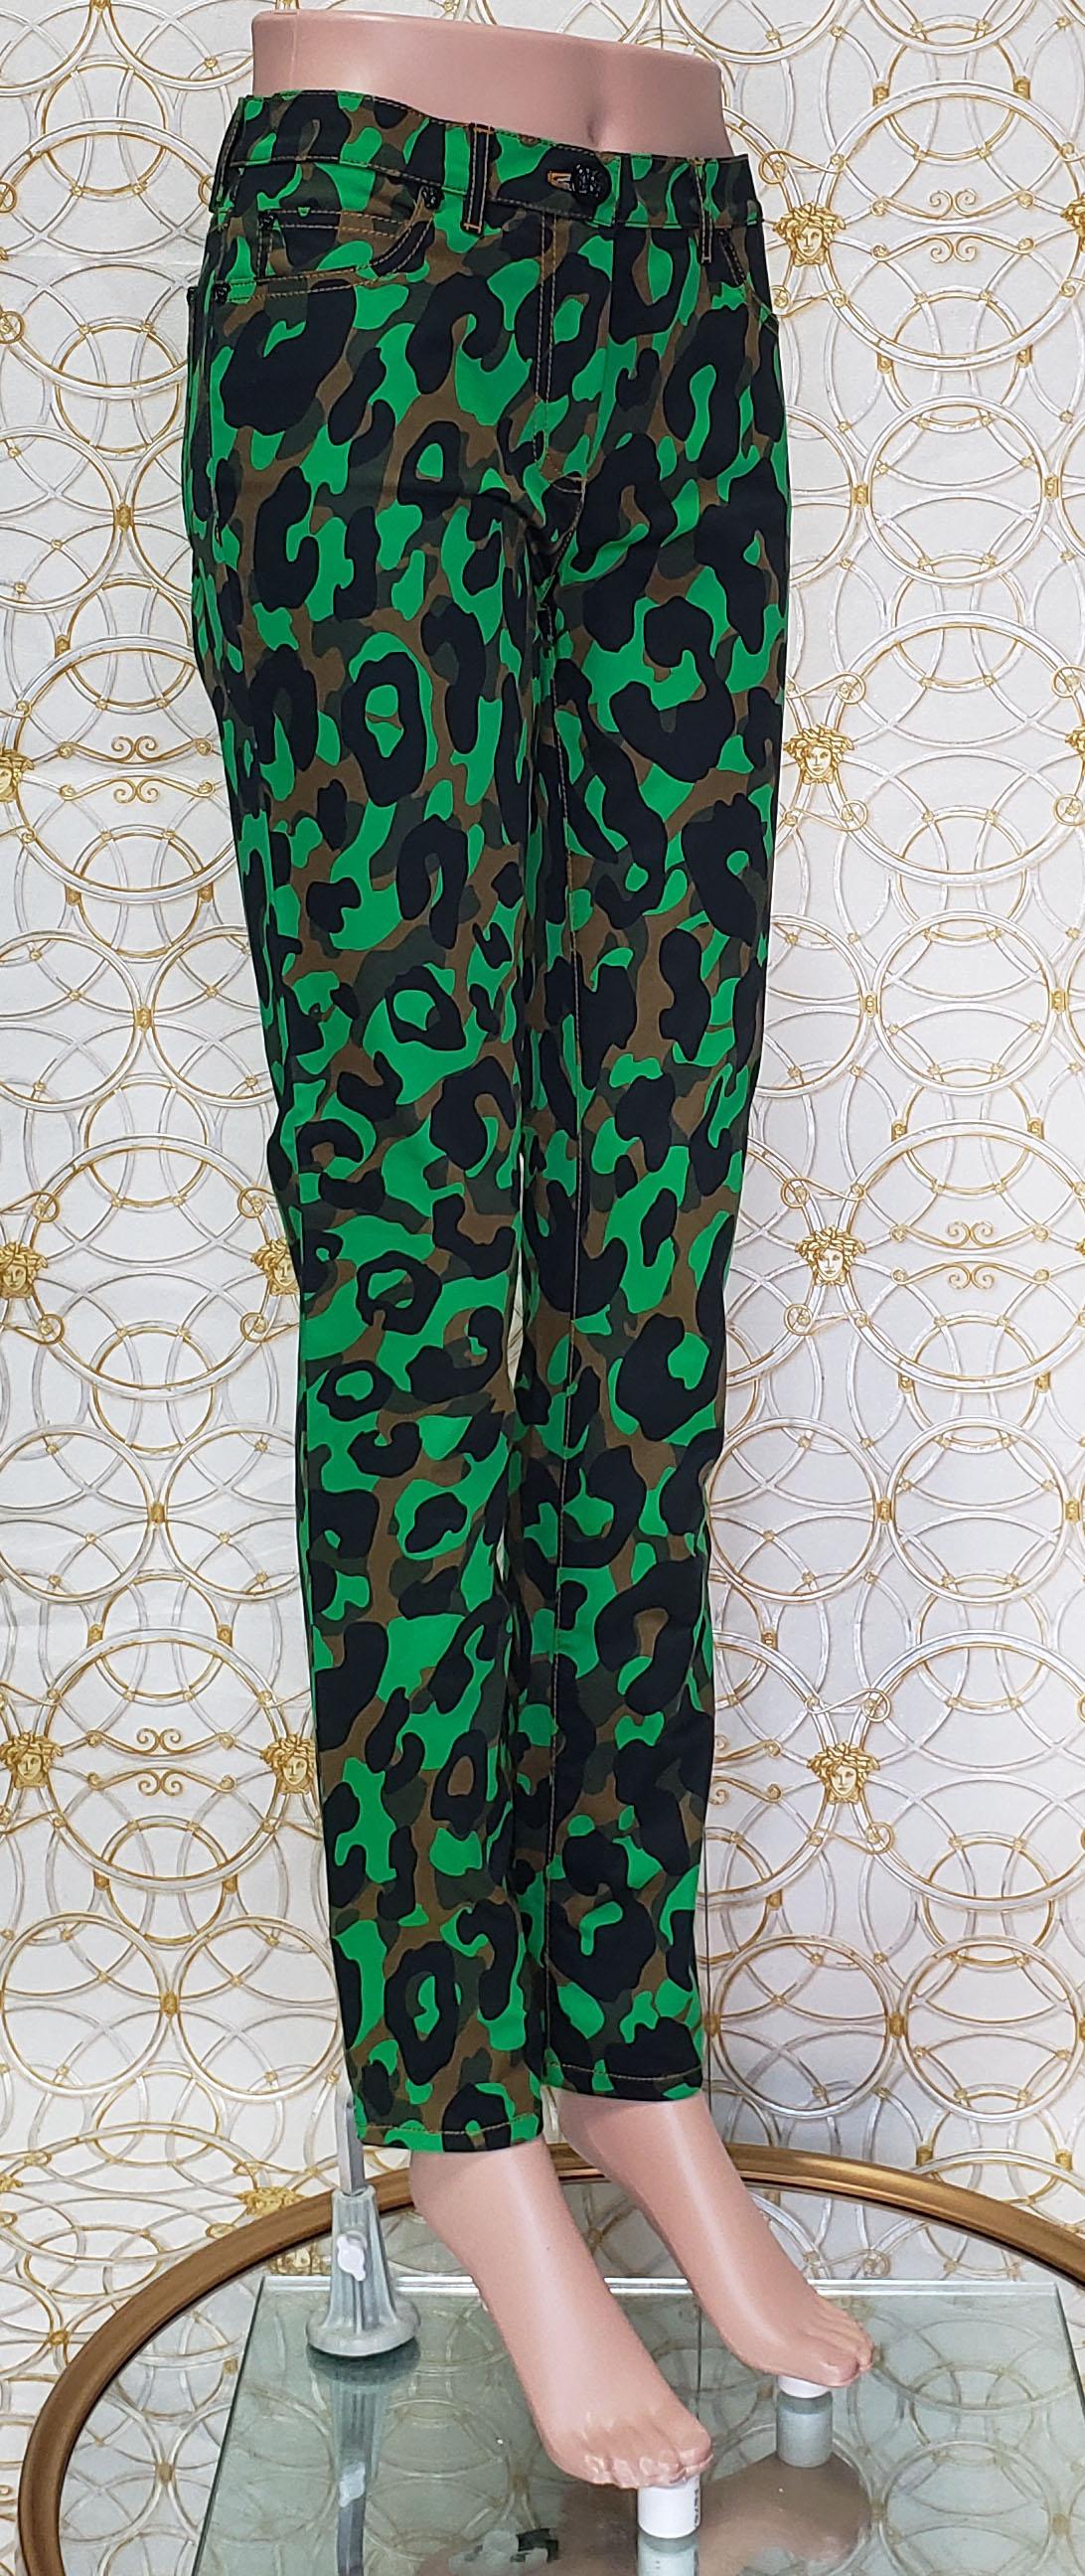 S/S 2016 VERSACE GREEN MILITARY PANTS size 28 For Sale 2